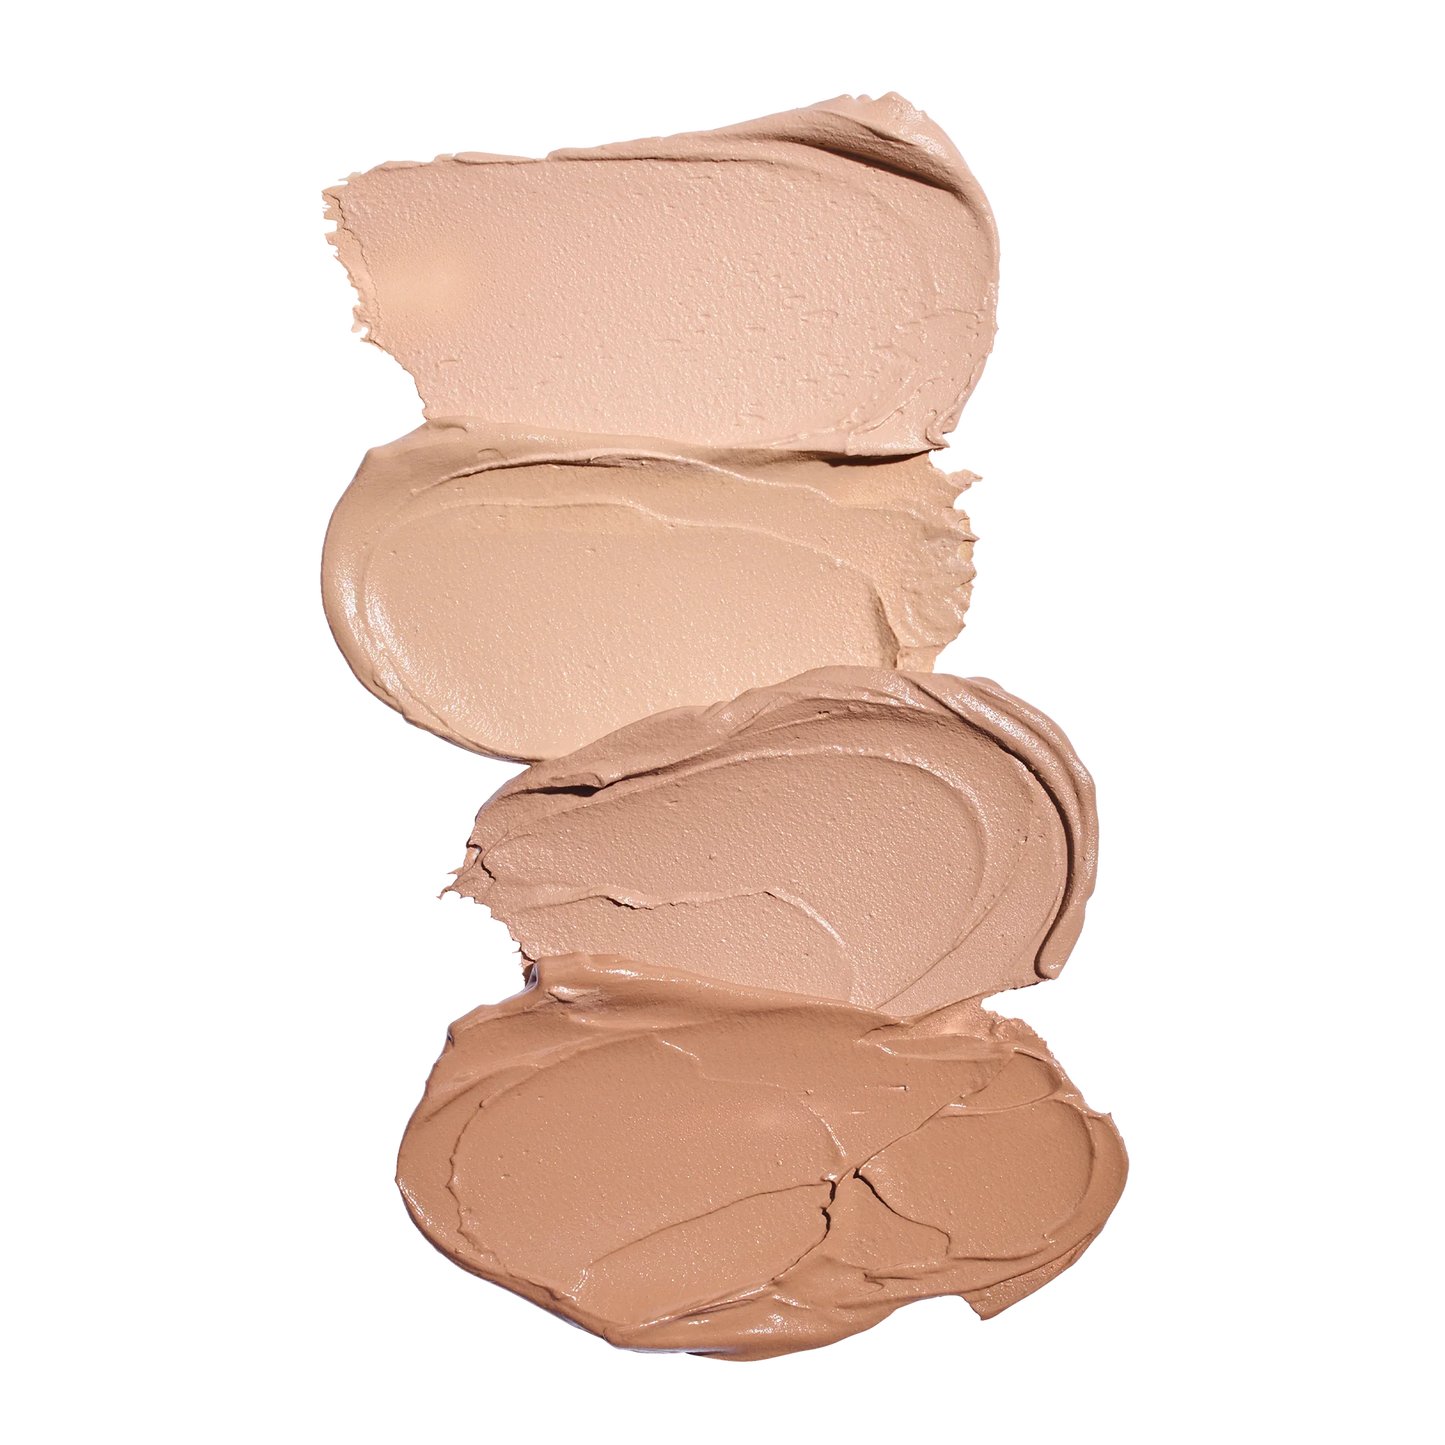 Tint Du Soleil Whipped Mineral Foundation SPF 30